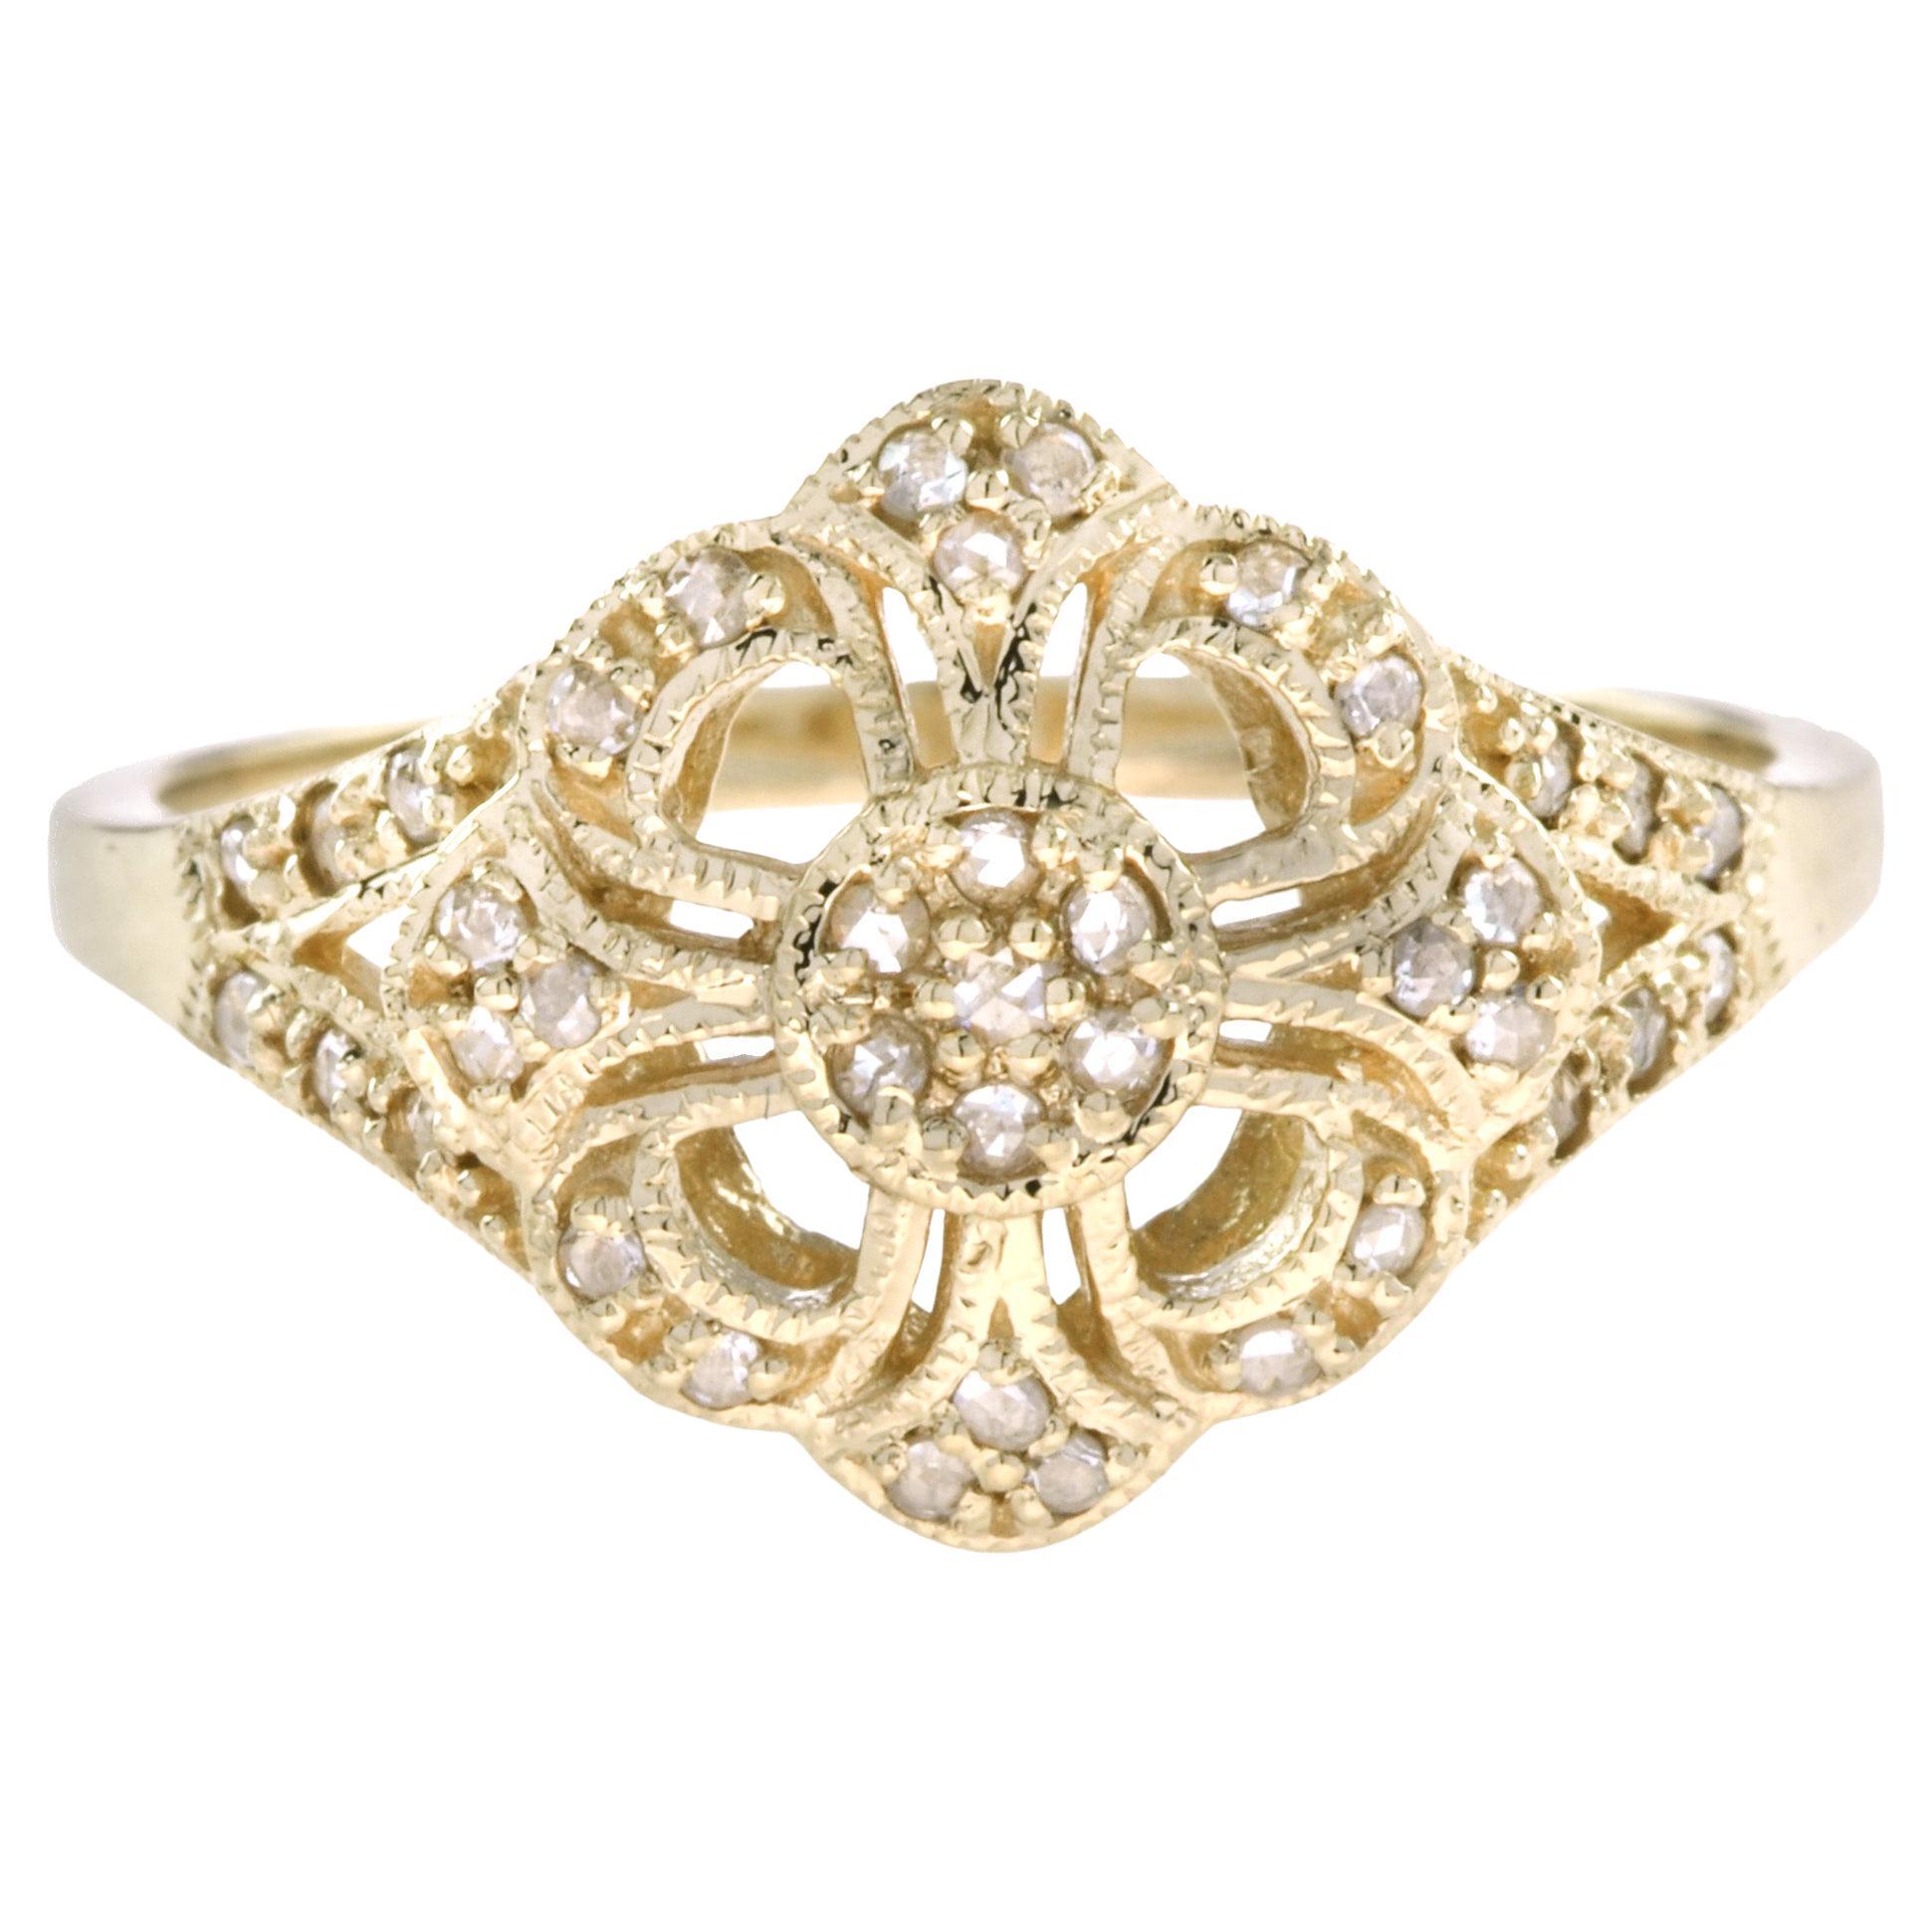 For Sale:  Vintage Style Diamond Flower Ring in 18K Yellow Gold